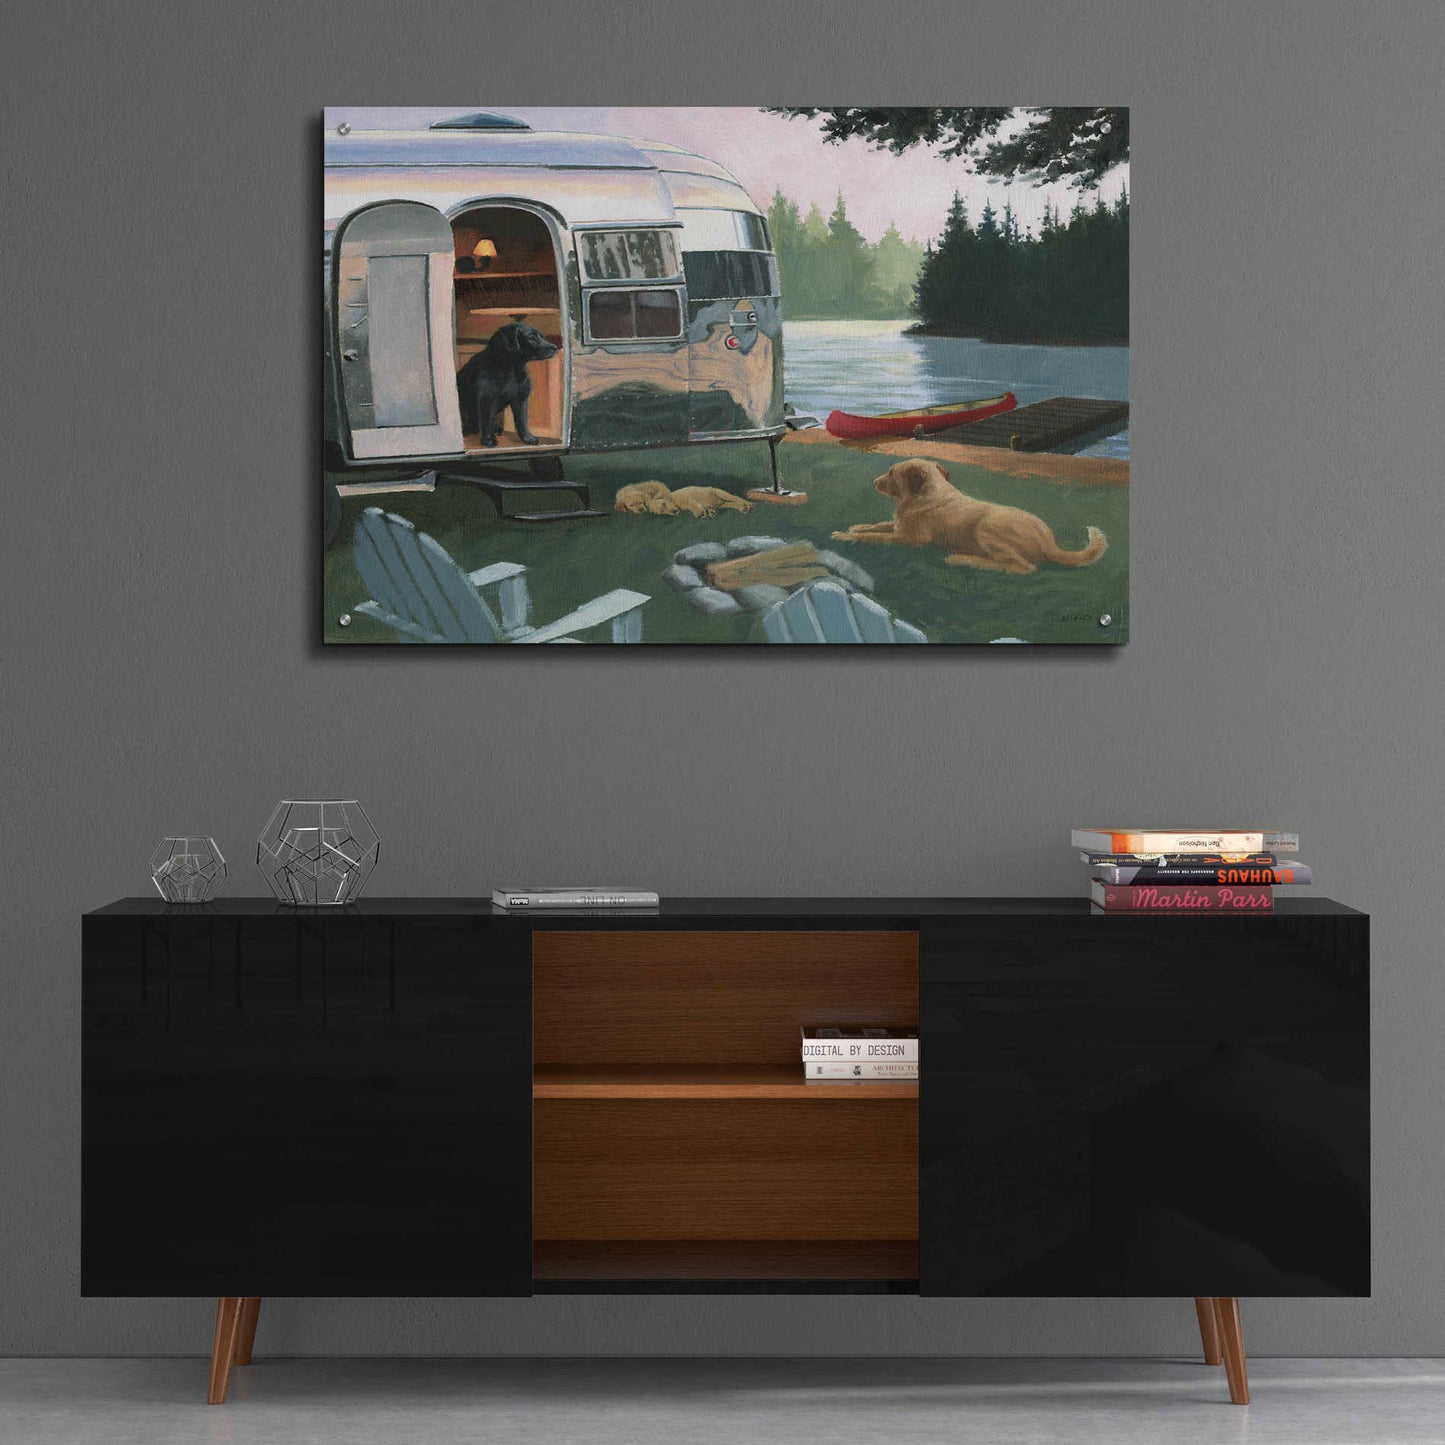 Epic Art 'Canine Camp' by James Wiens, Acrylic Glass Wall Art,36x24